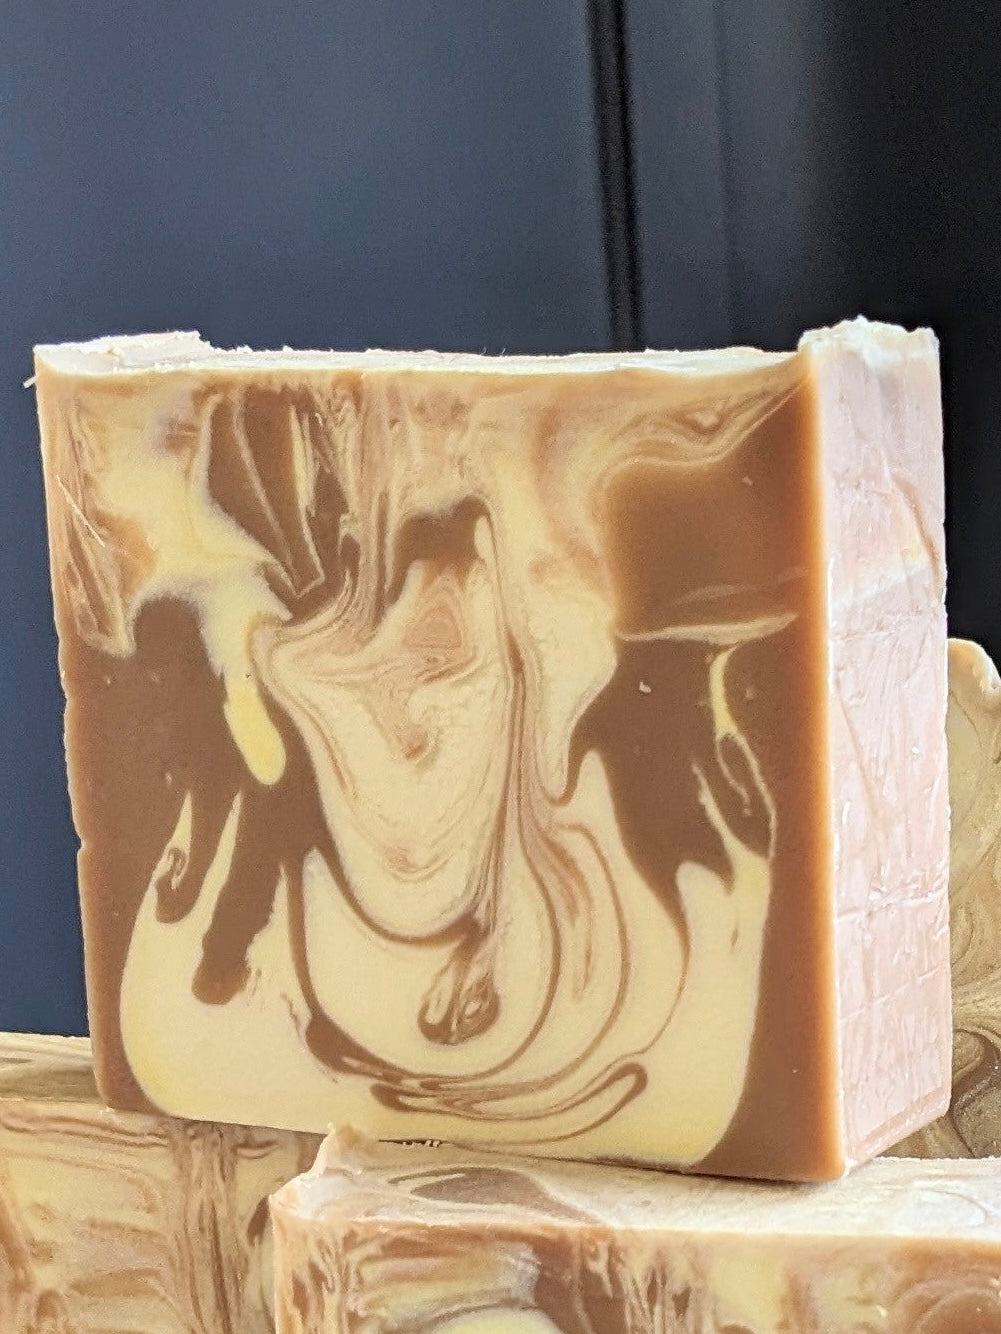 Whiskey Suede - The Wooden Boar Soap Company